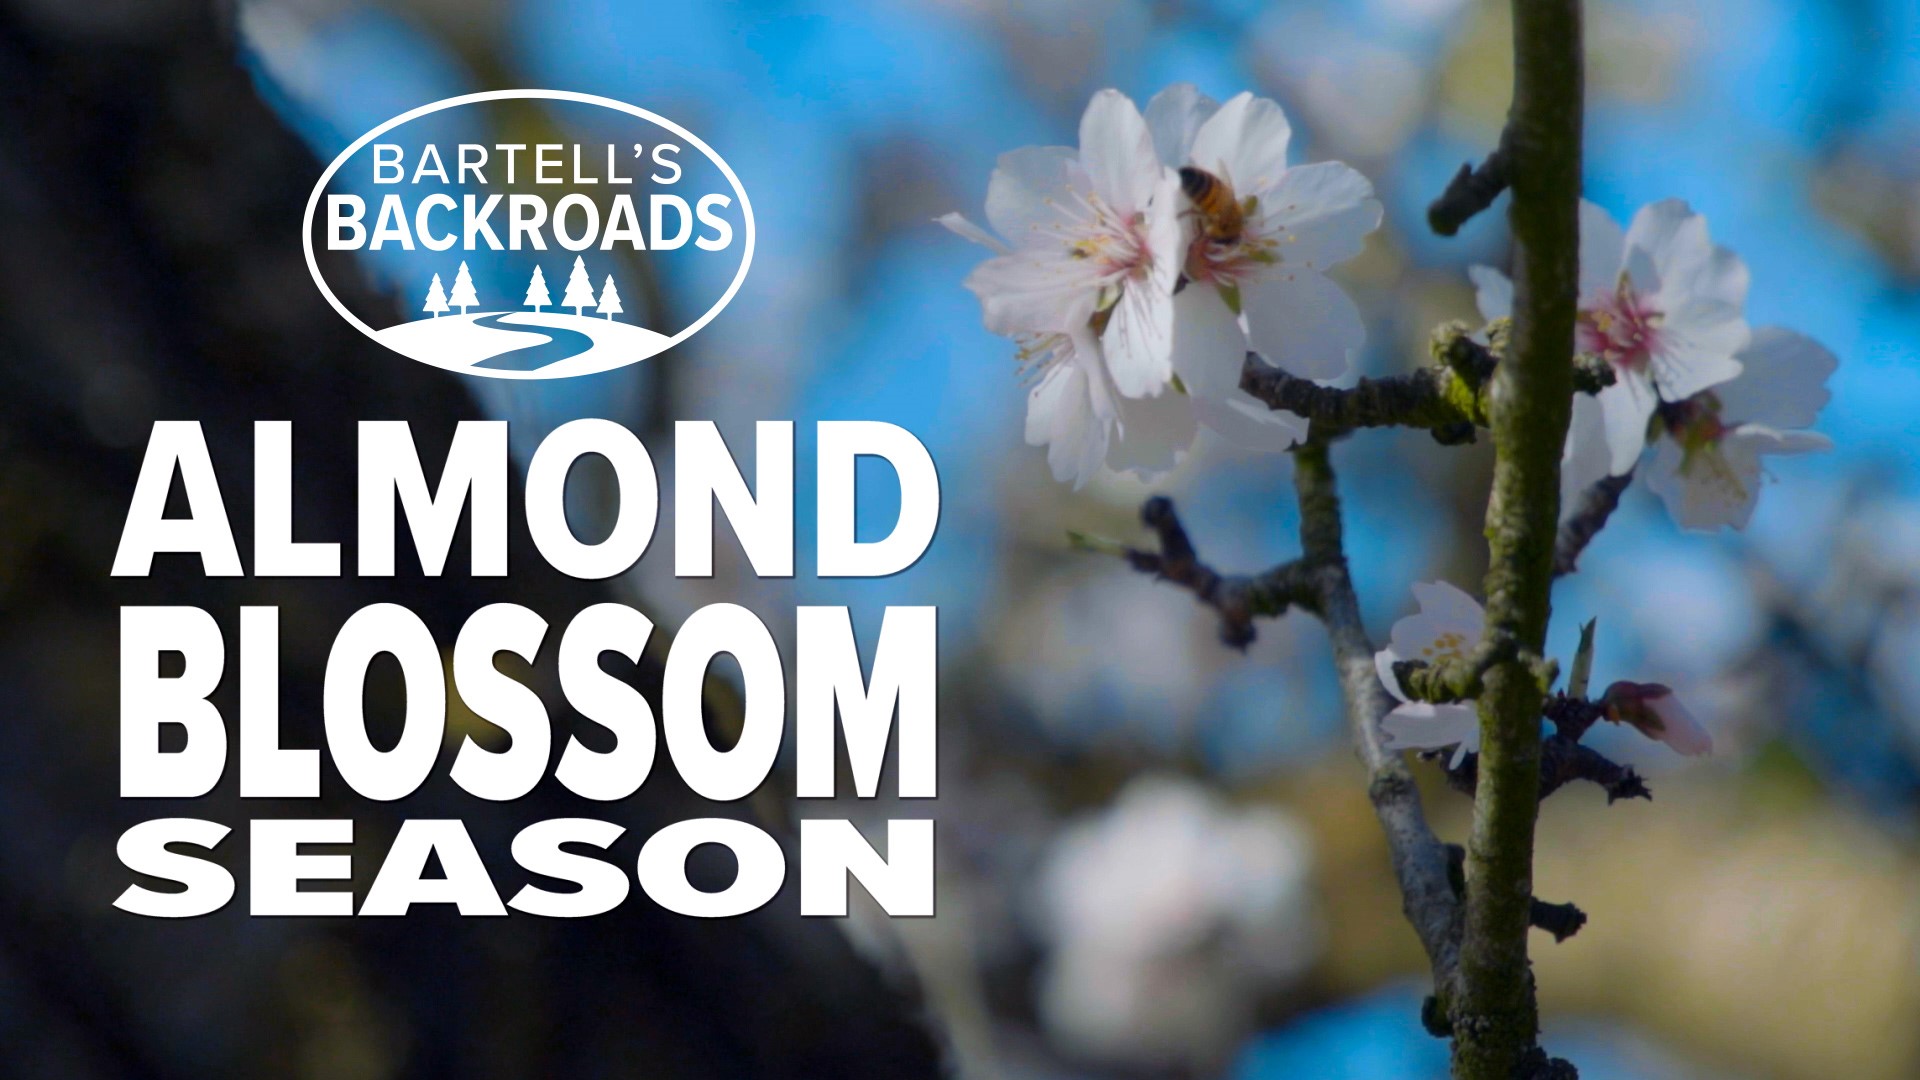 Forget cherry blossoms. In Northern California, it's the time of year when almond trees come to life, and there are a lot of them. About 80% of the world supply comes from here. As John Bartell discovered, the blooms look amazing and the smell is something you have to experience yourself to appreciate.